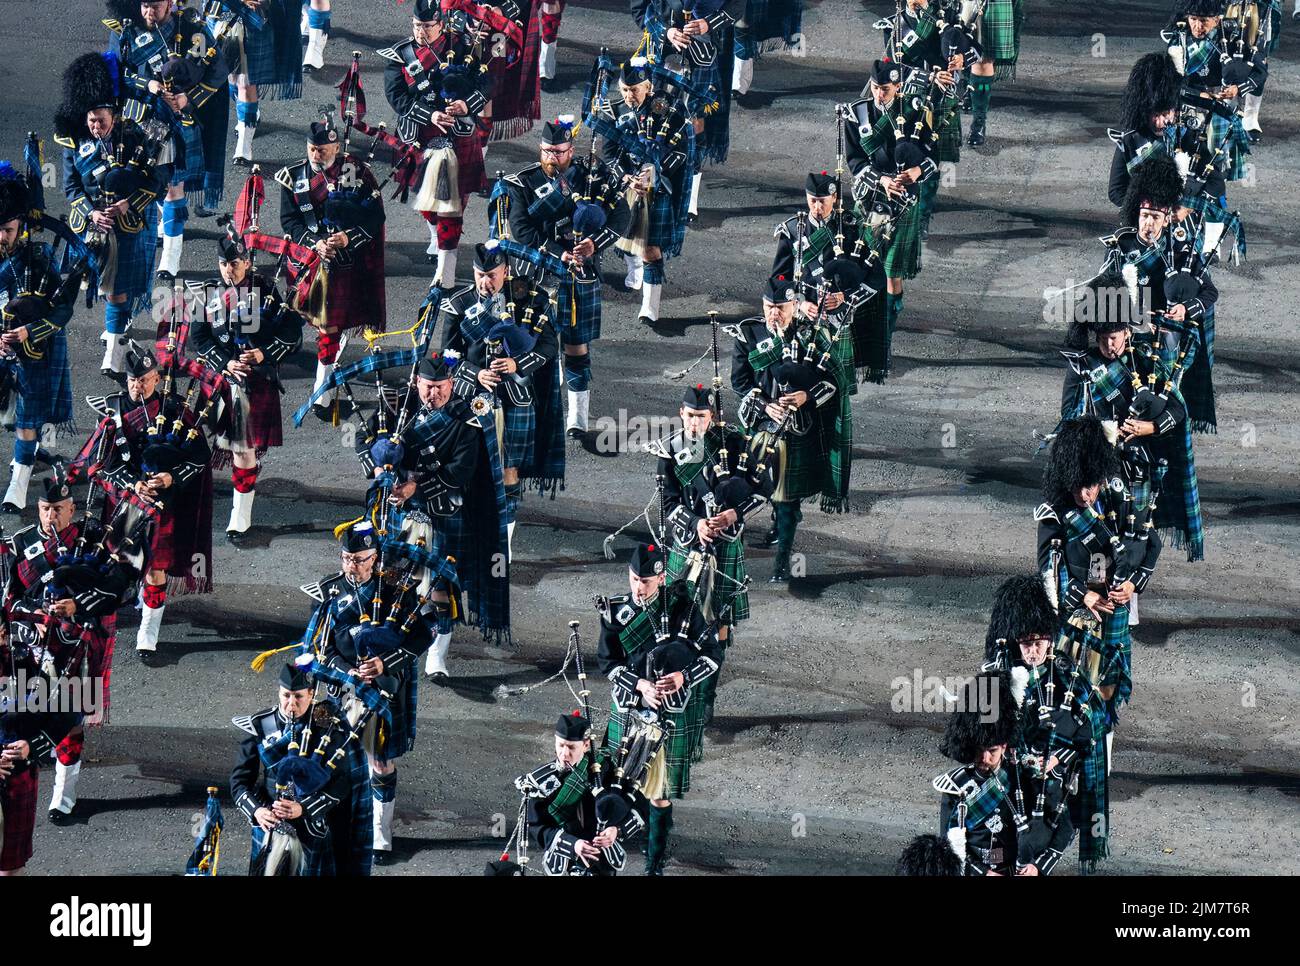 The Massed Pipes and Drums perform on the Esplanade of Edinburgh Castle at this year's Royal Edinburgh Military Tattoo. After a two-year hiatus the Tattoo returns with the 2022 show titled 'Voices' with over 800 performers and includes international performances from Mexico, The United States, Switzerland and New Zealand. Picture date: Thursday August 4, 2022. Stock Photo